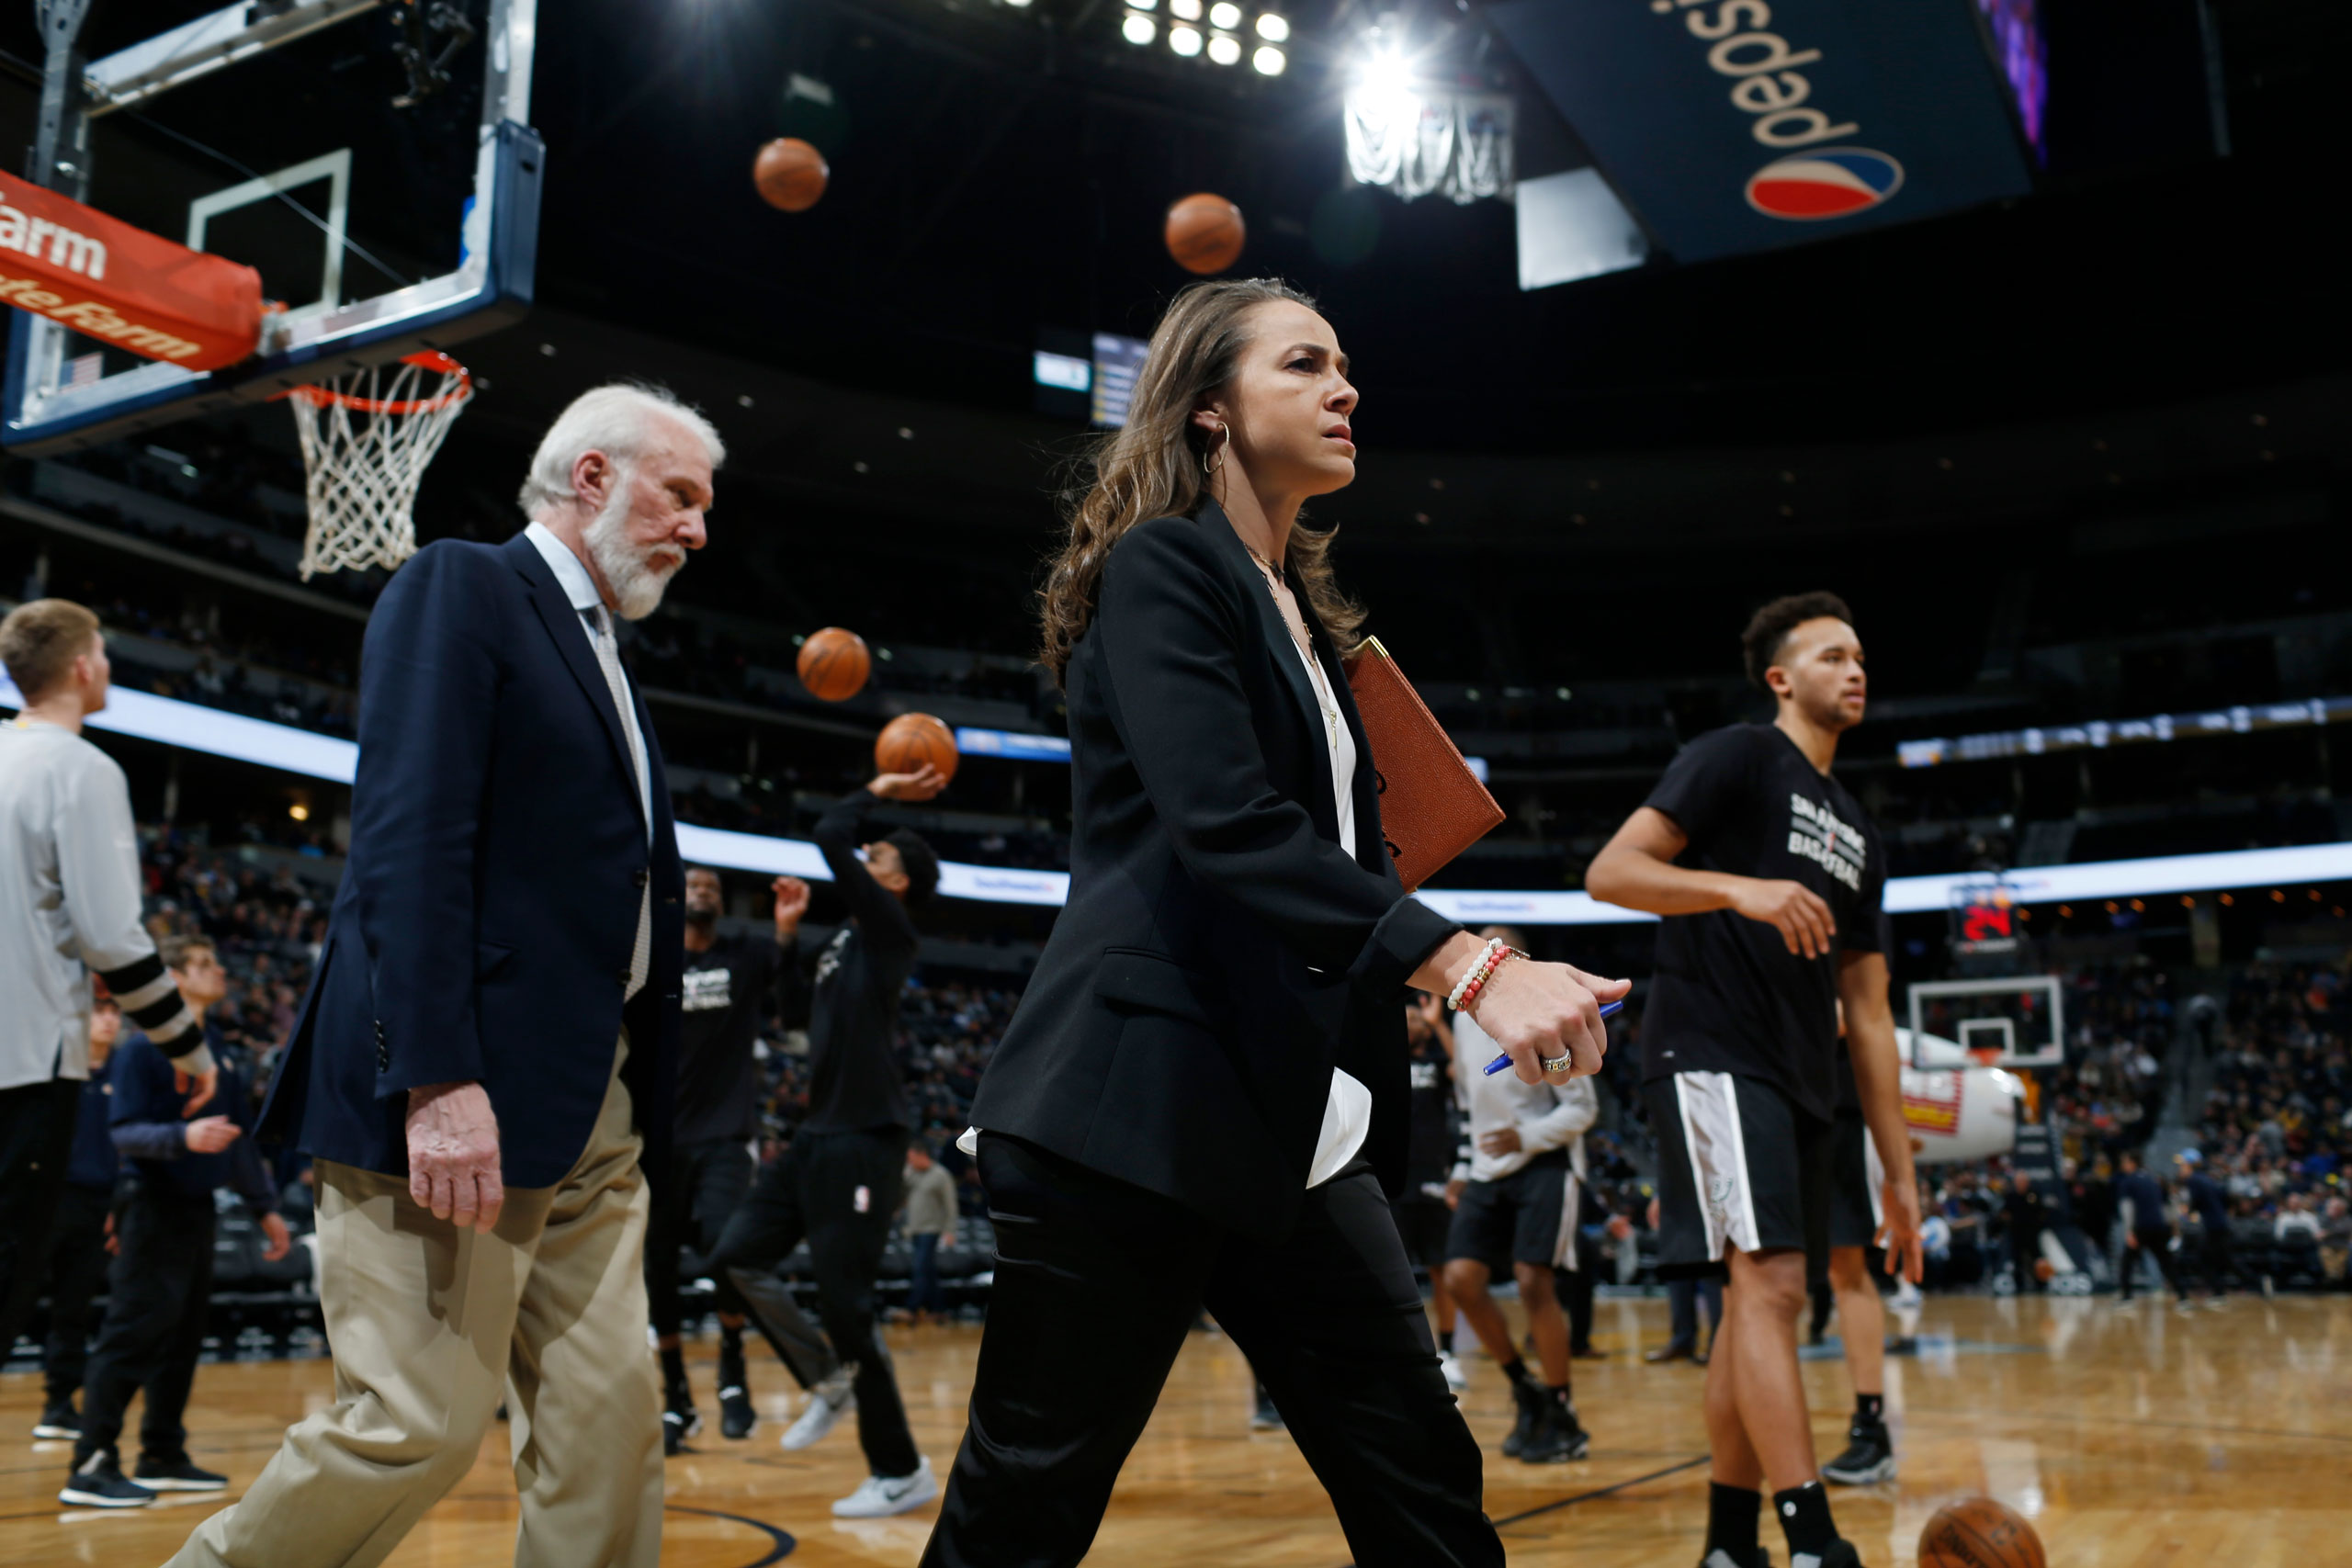 Assistant coach Becky Hammon and head coach Gregg Popovich on the court during a San Antonio Spurs game in 2017. (David Zalubowski—AP)